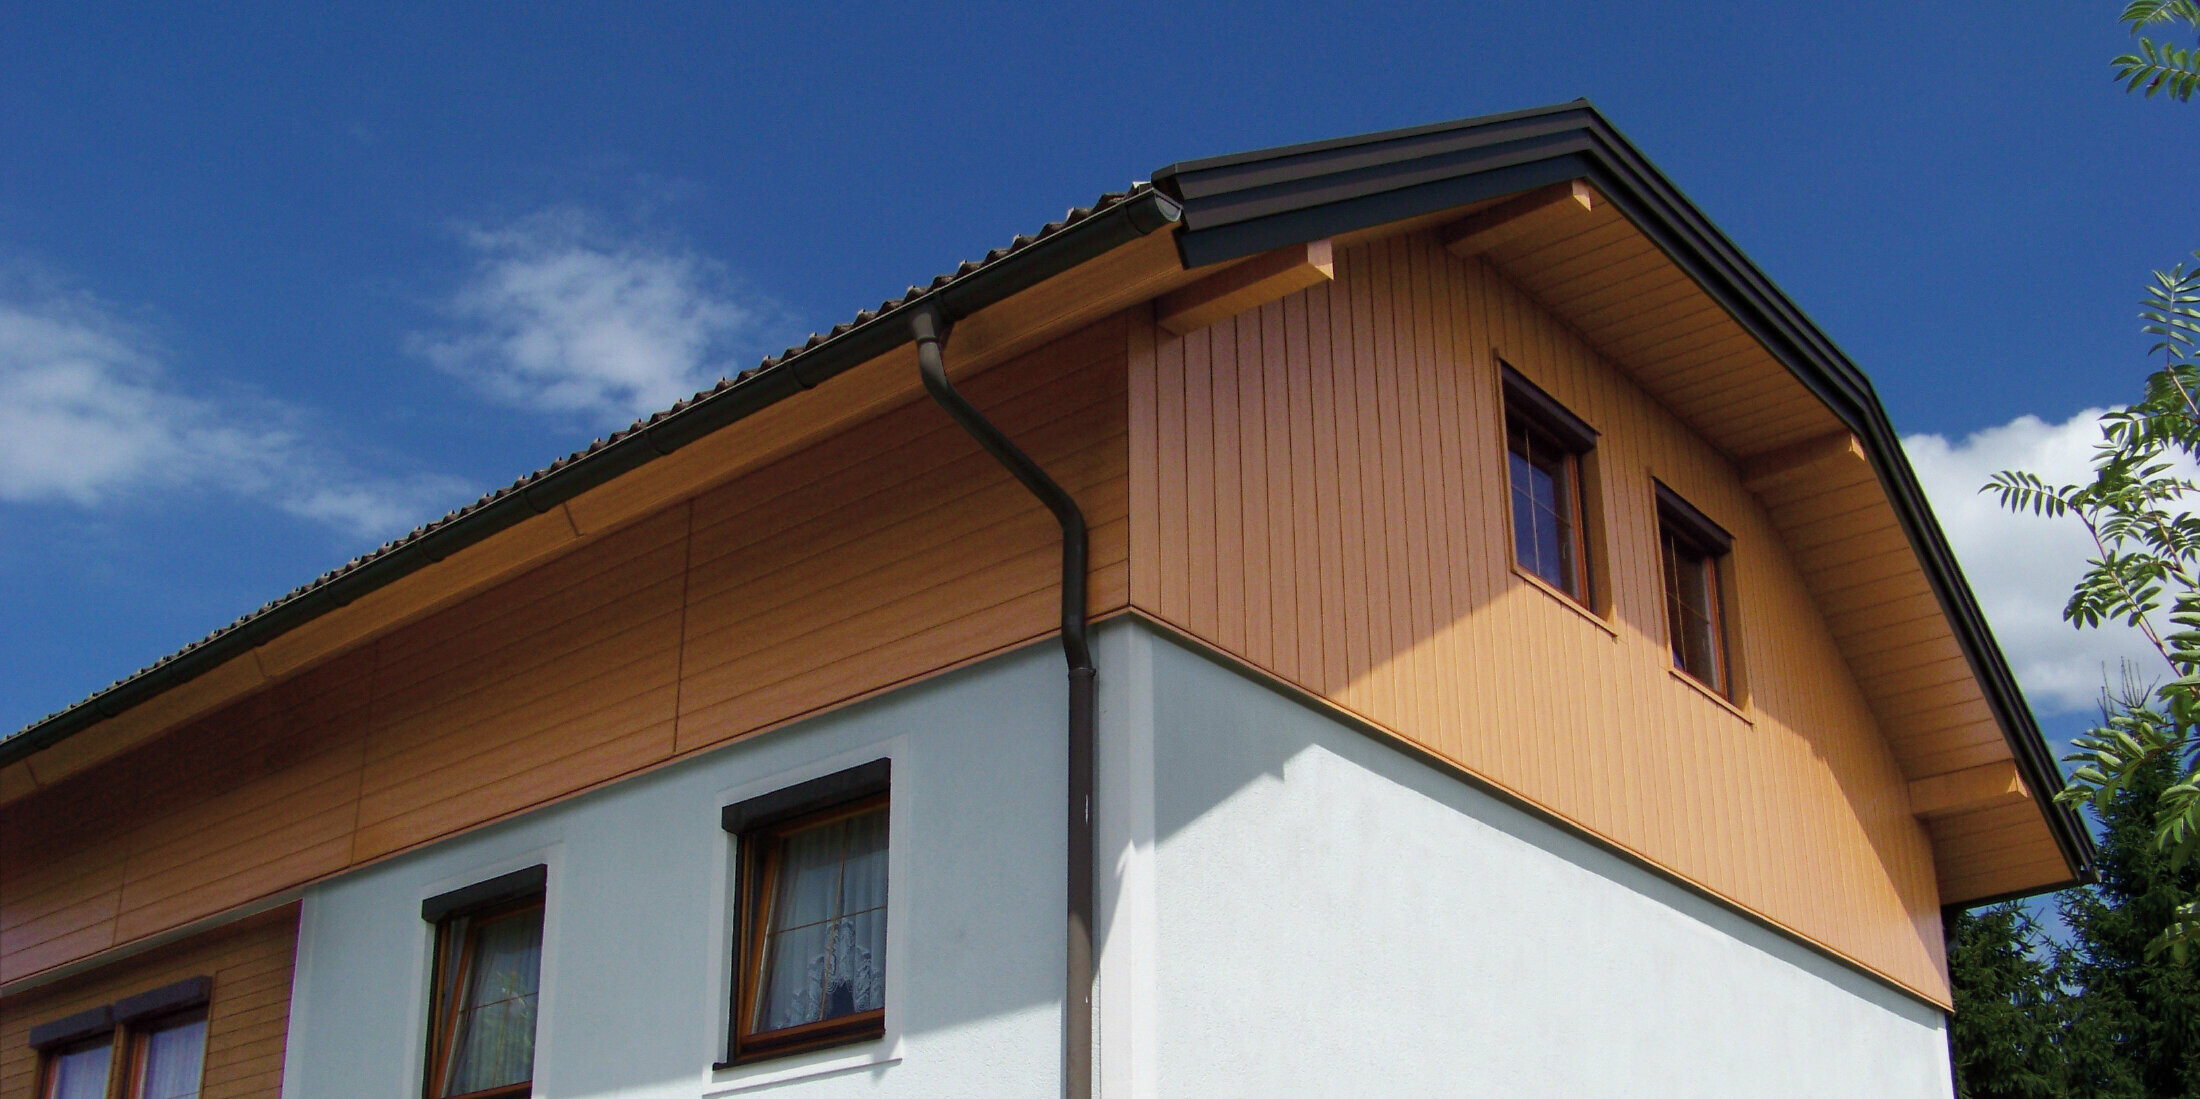 Large detached house with half-hipped roof and gable cladding using PREFA sidings in wood effect (natural oak colour)